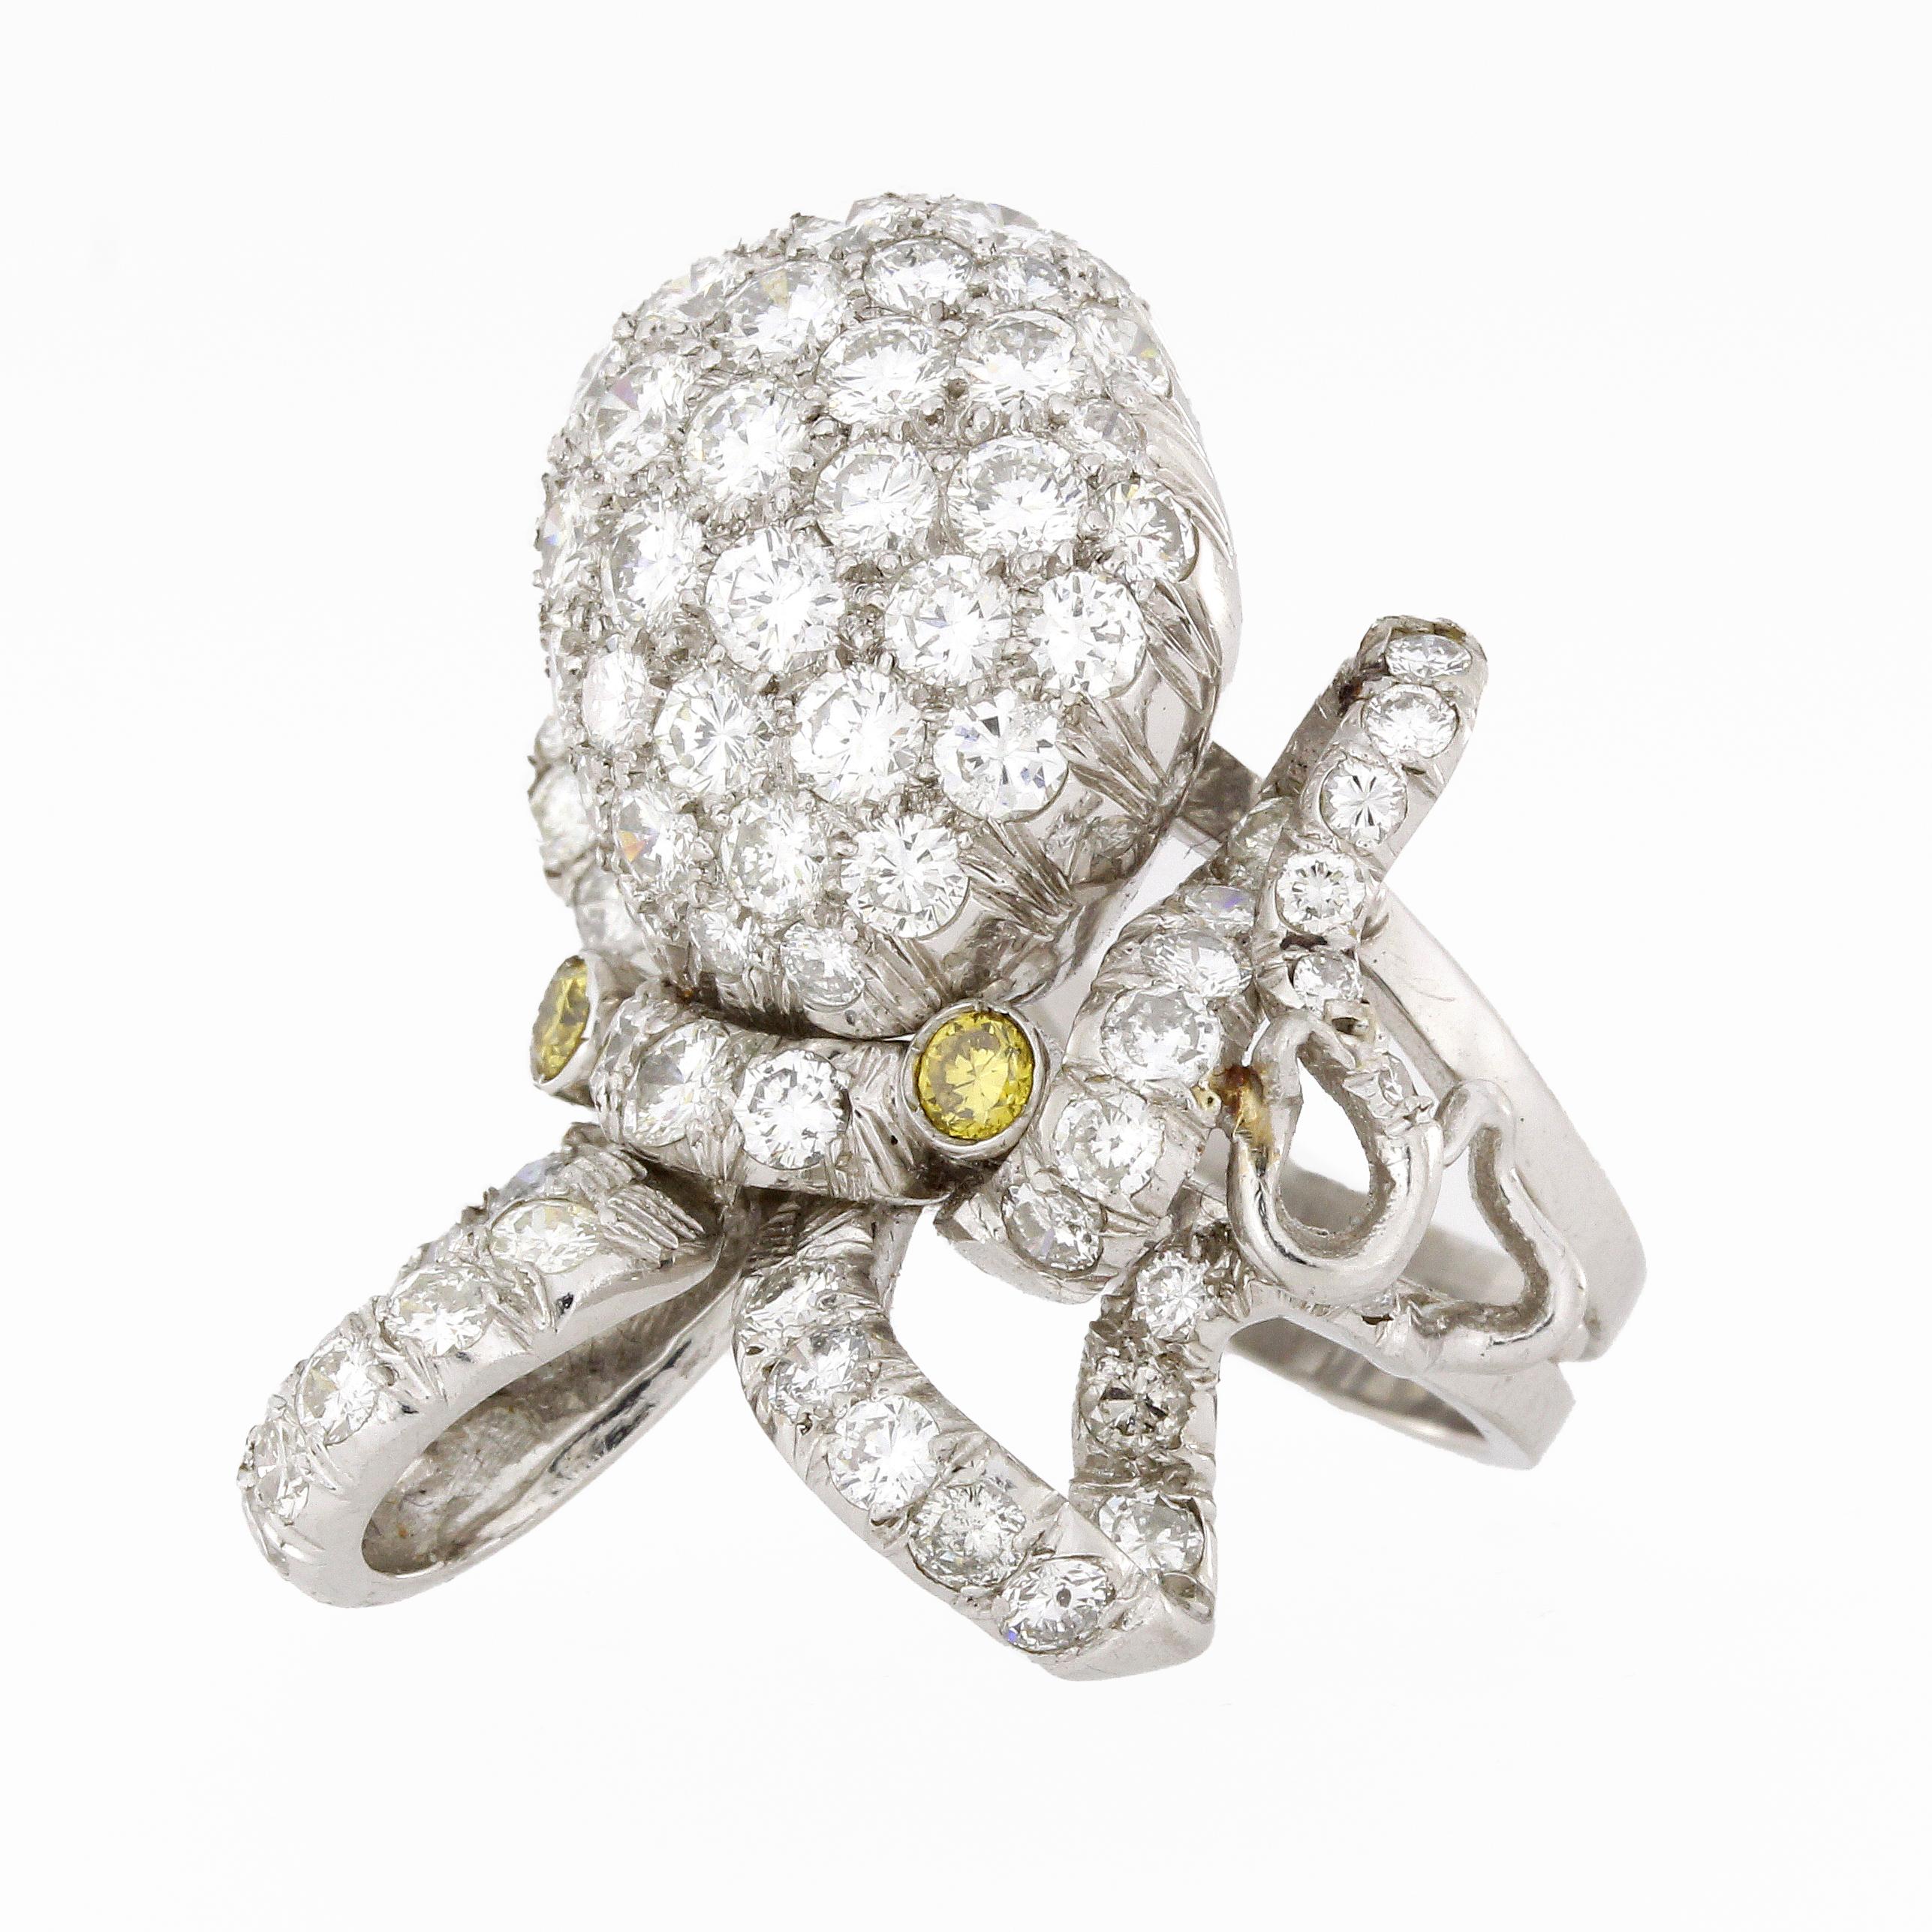 Platinum Octopus Cocktail Ring with approx. 5.0ct of brilliant cut diamonds and two yellow diamonds.

Measurements:
L: 32mm
W: 25mm
D: 16mm
 